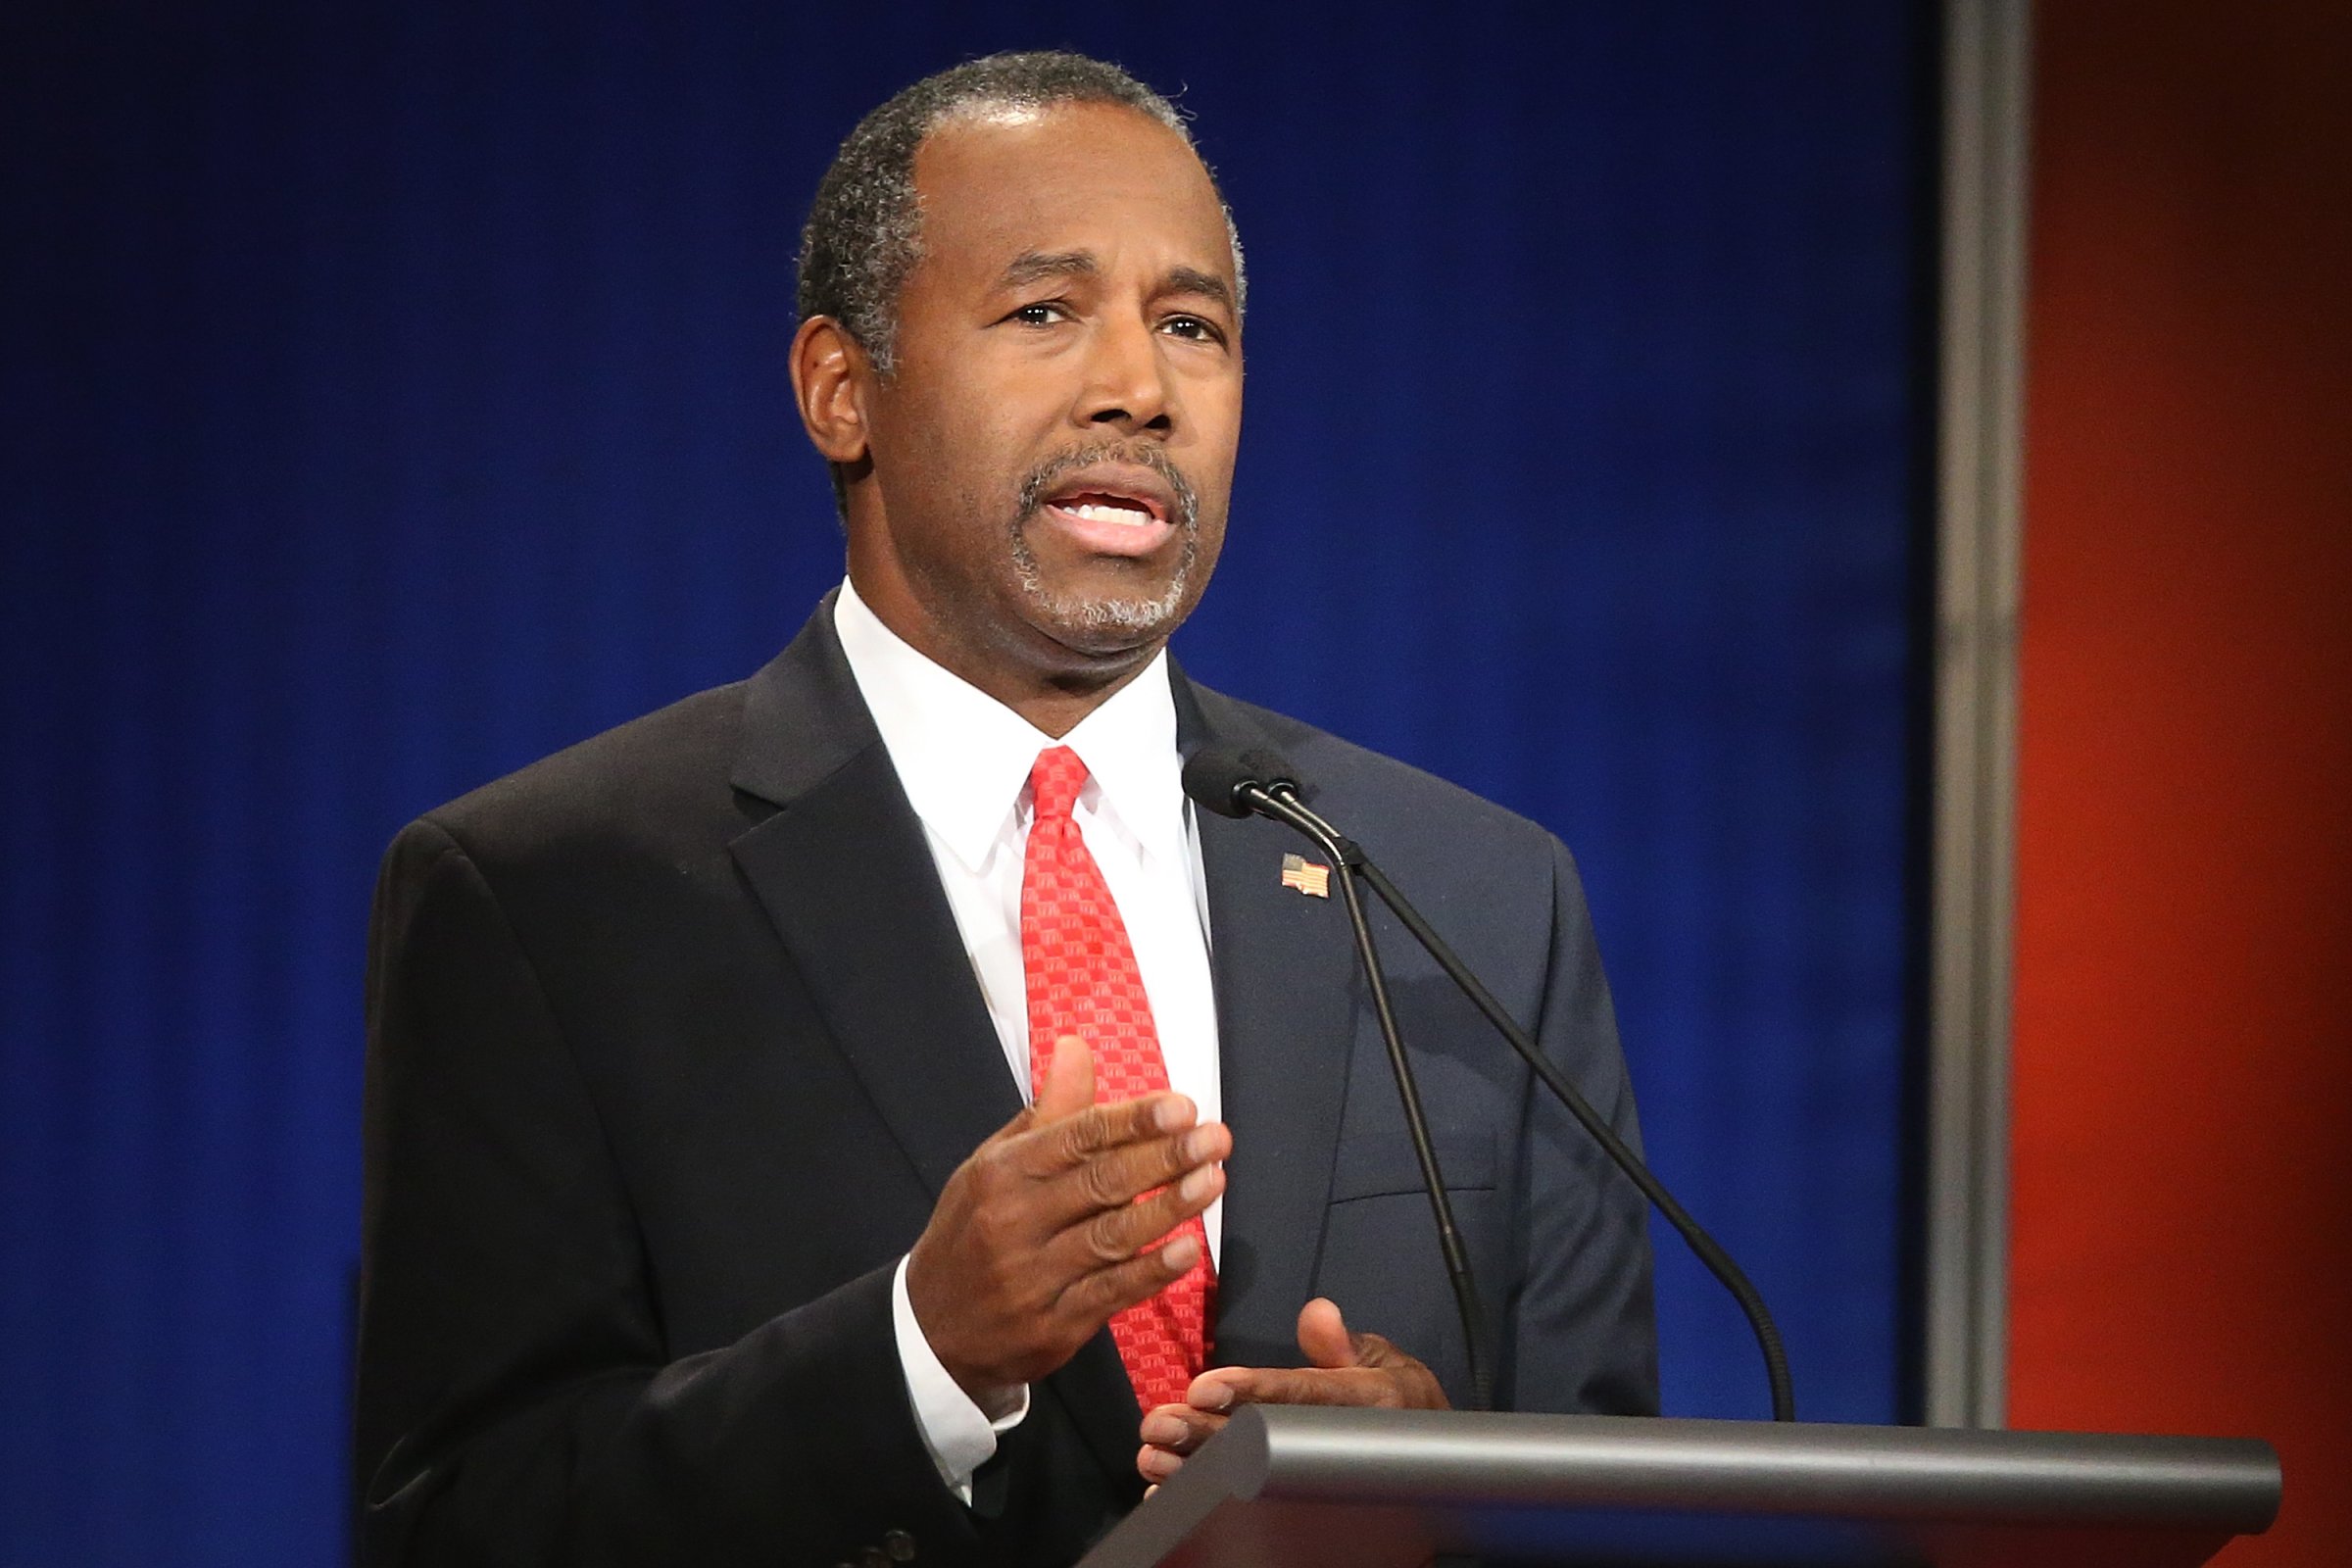 Ben Carson participates in the Fox Business Network Republican presidential debate at the North Charleston Coliseum and Performing Arts Center on Jan. 14, 2016 in North Charleston, S.C.